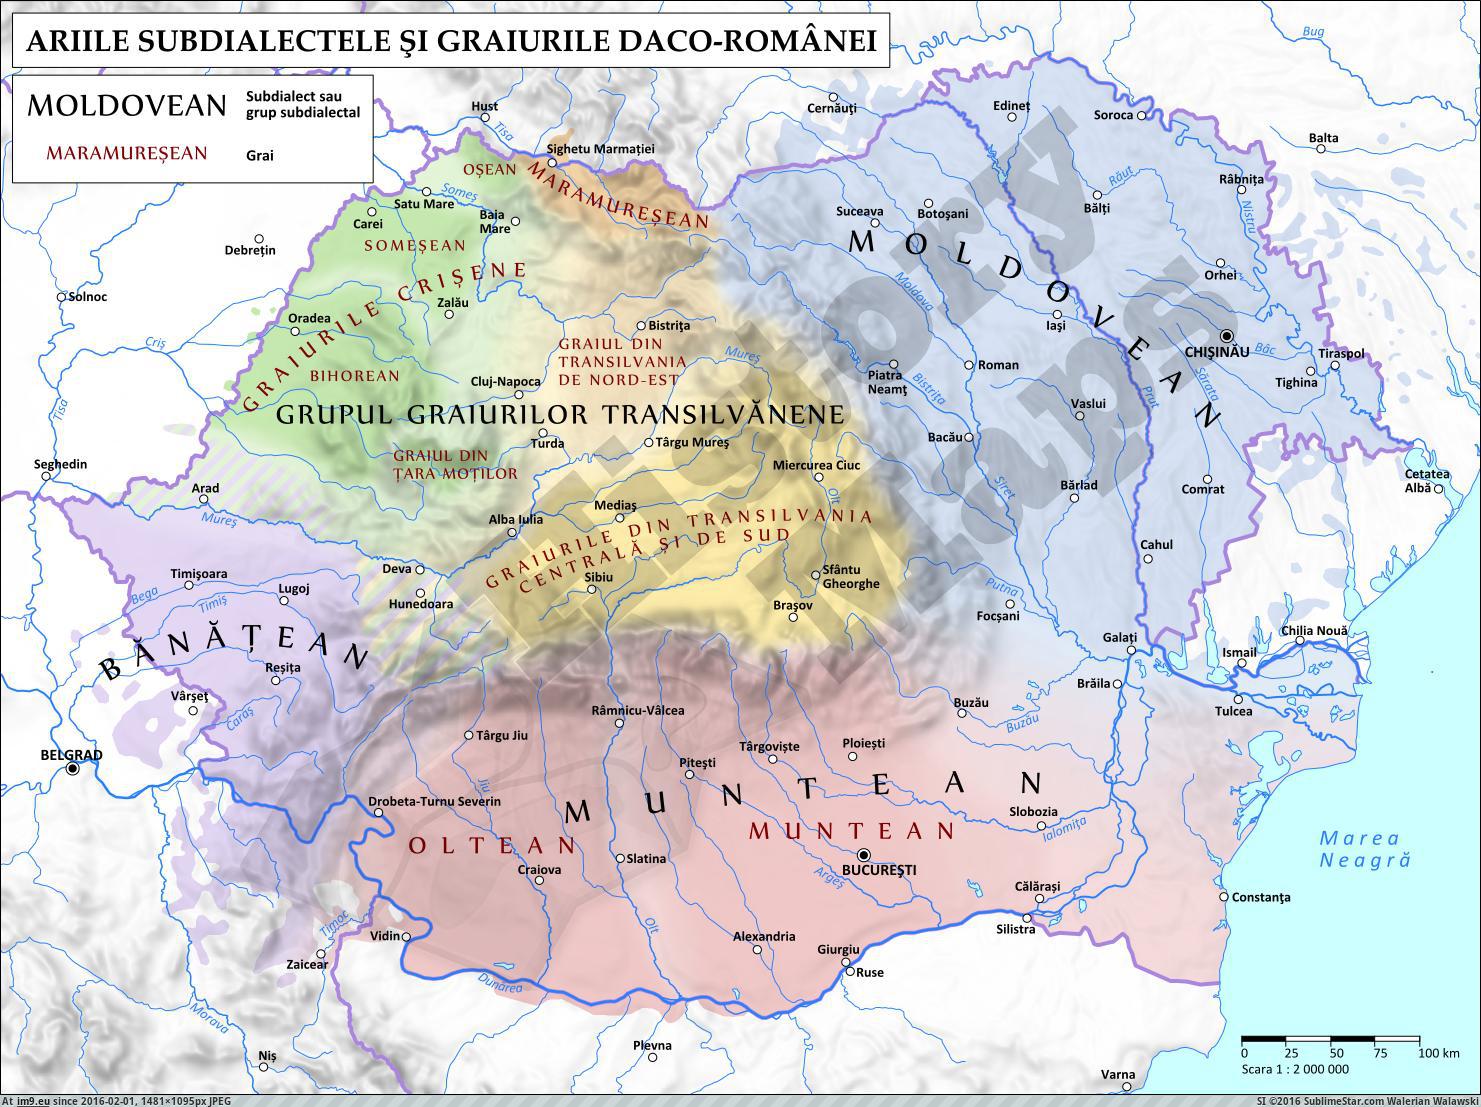 [Mapporn] Subdialects of the Romanian language [1481x1095] (in My r/MAPS favs)